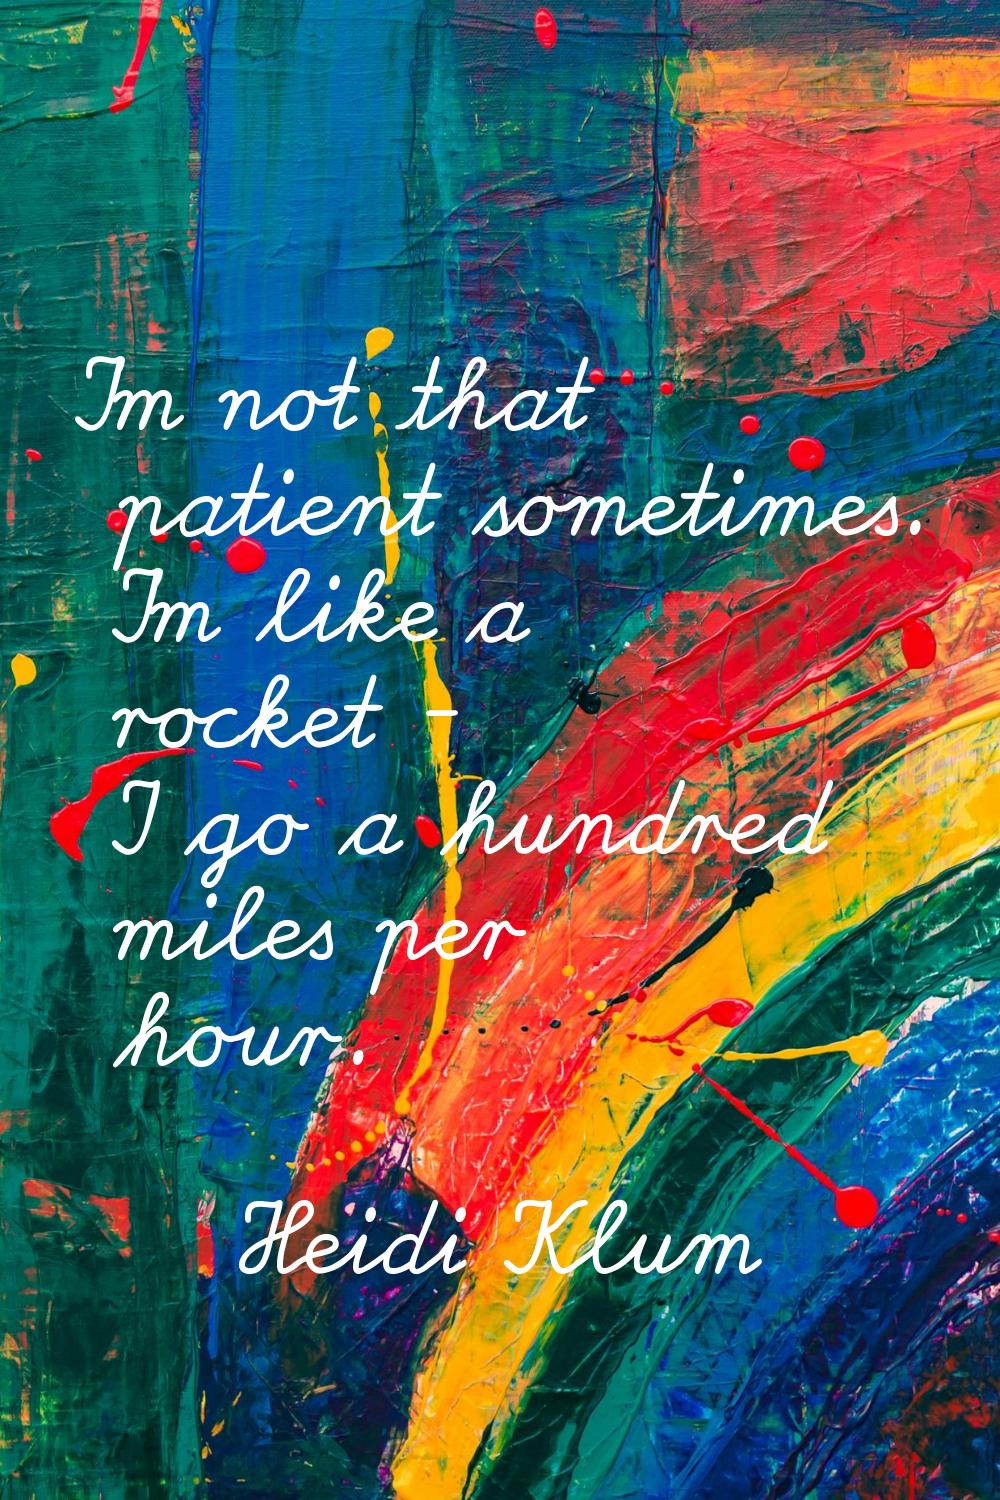 I'm not that patient sometimes. I'm like a rocket - I go a hundred miles per hour.